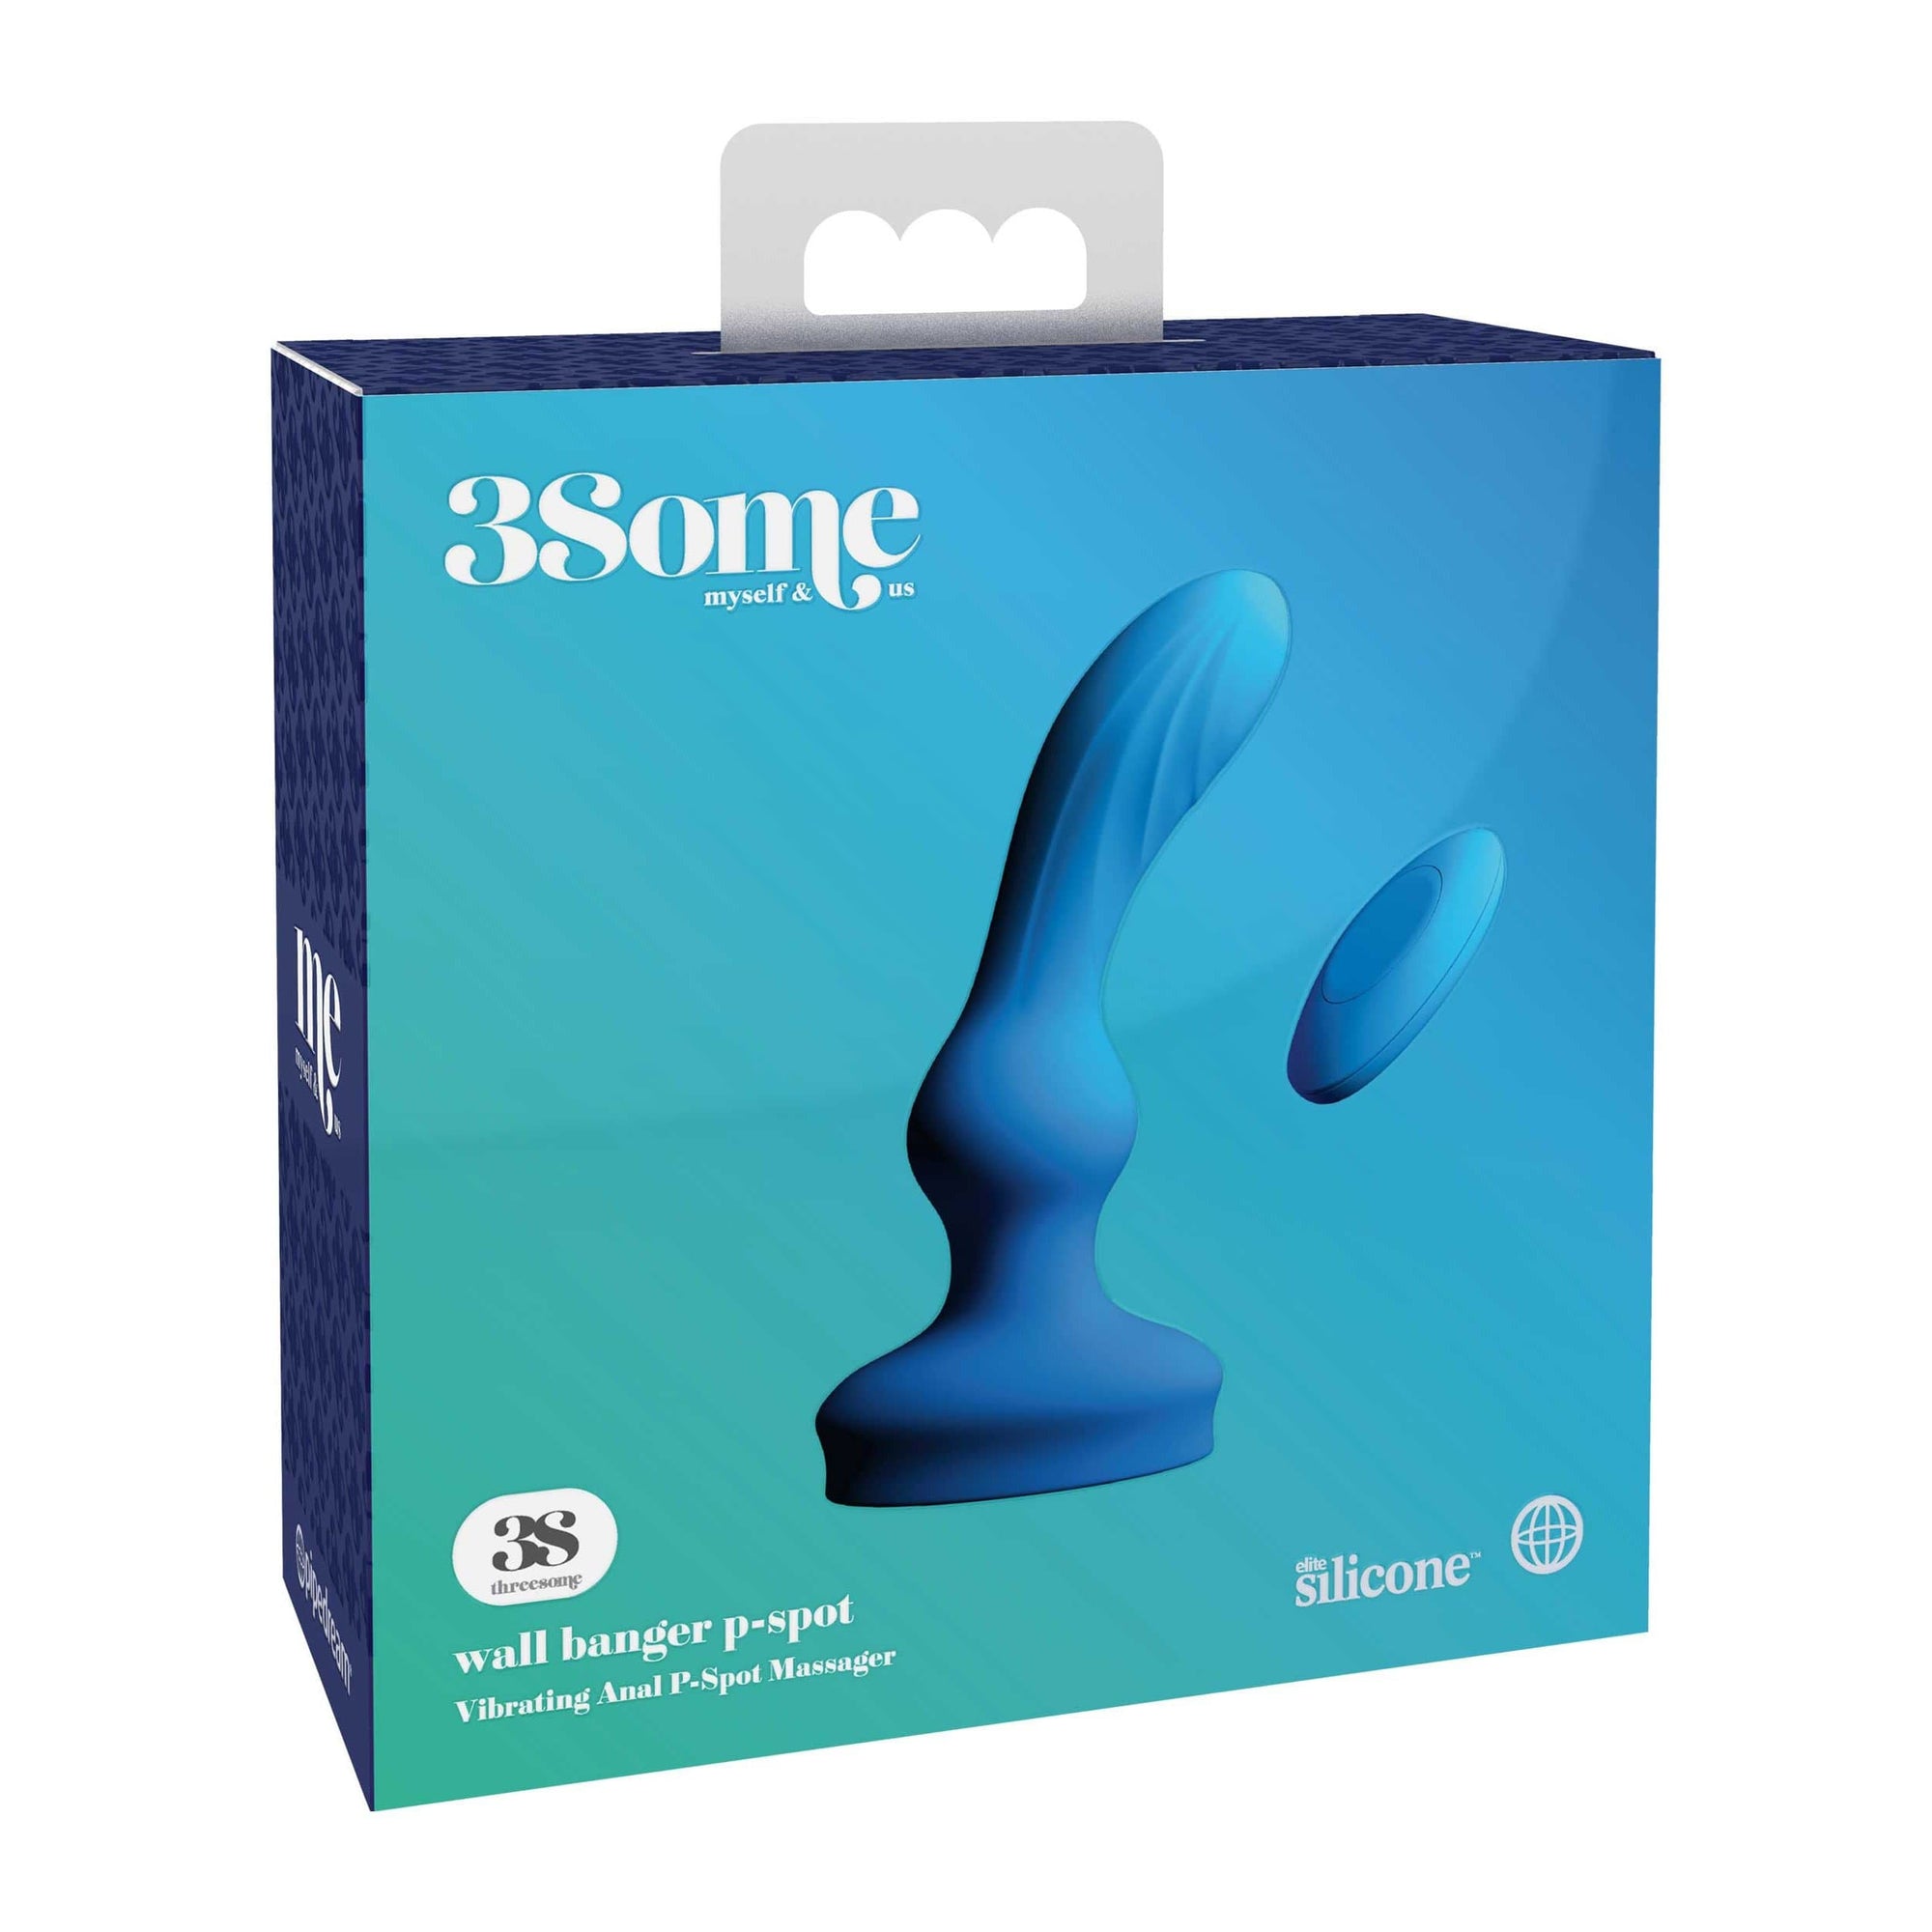 Pipedream - 3Some Wall Banger Vibrating Anal P Spot Massager (Blue) Remote Control Anal Plug (Vibration) Rechargeable 603912765861 CherryAffairs